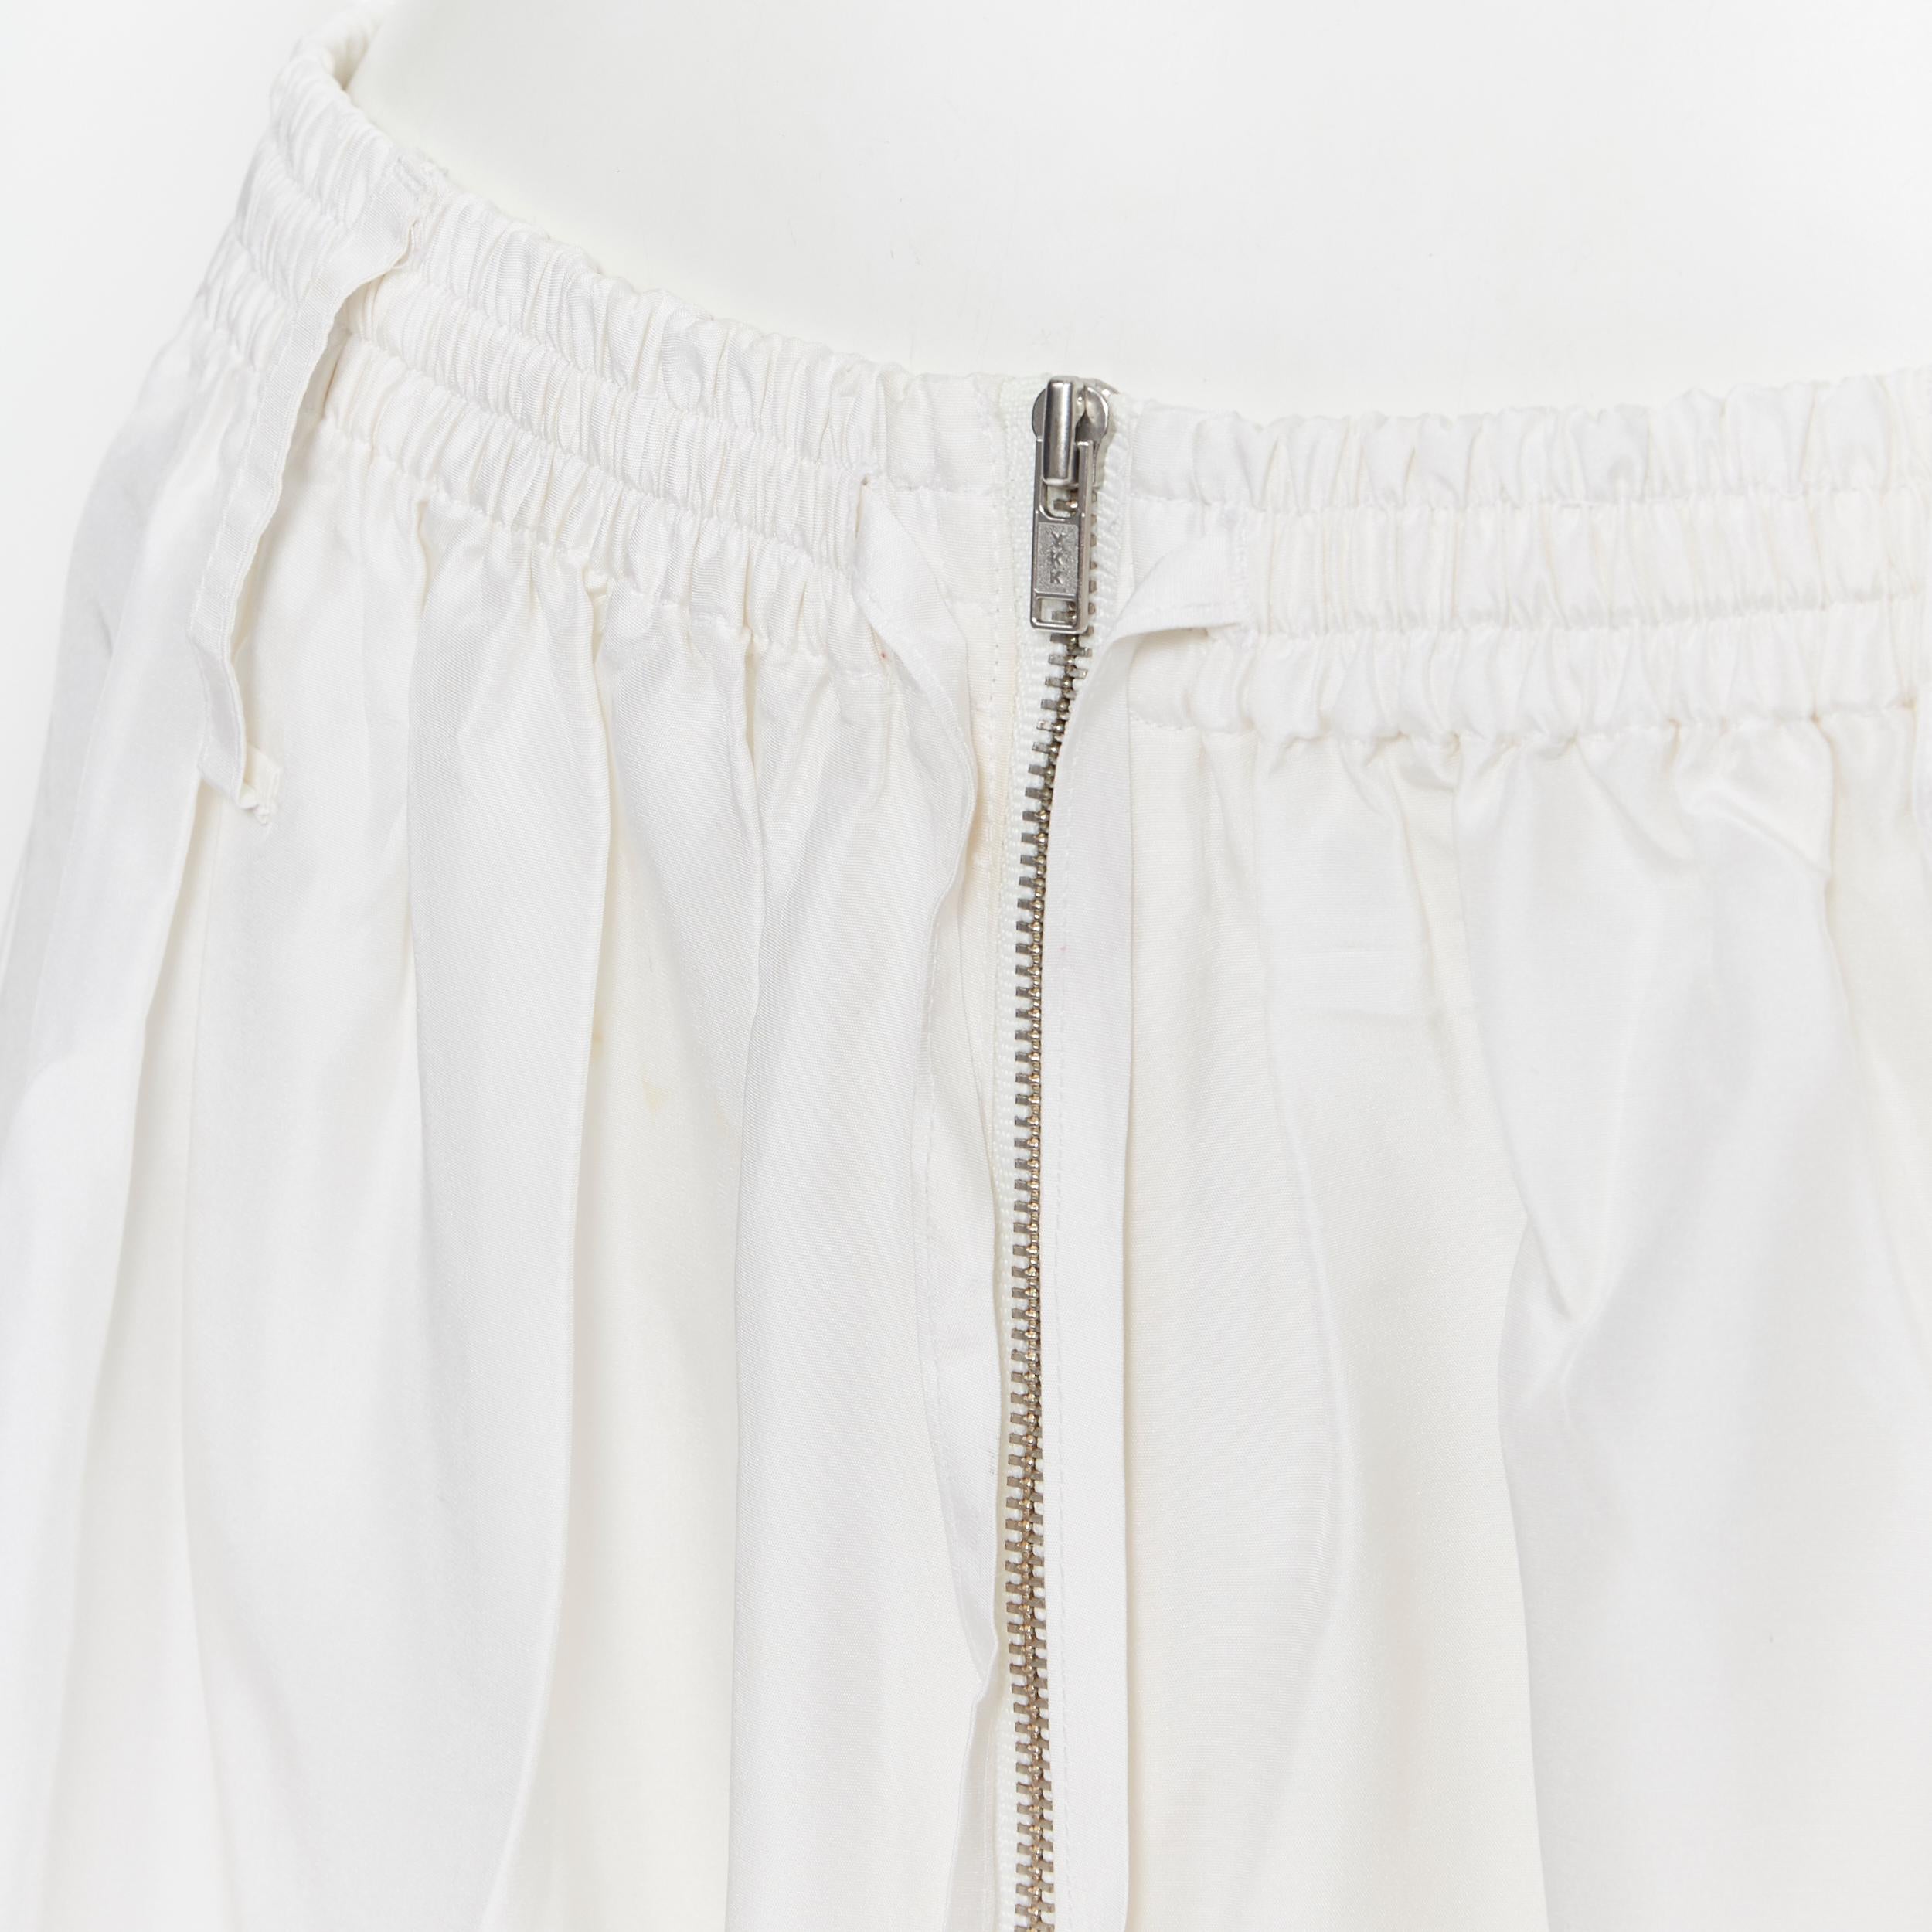 JOSEPH 100% silk ivory white elasticated drawstring zip detail midi skirt FR34
Brand: Joseph
Model Name / Style: Silk skirt
Material: Silk
Color: White
Pattern: Solid
Extra Detail: Stretch waist band. Zip front closure.
Made in: China

CONDITION: